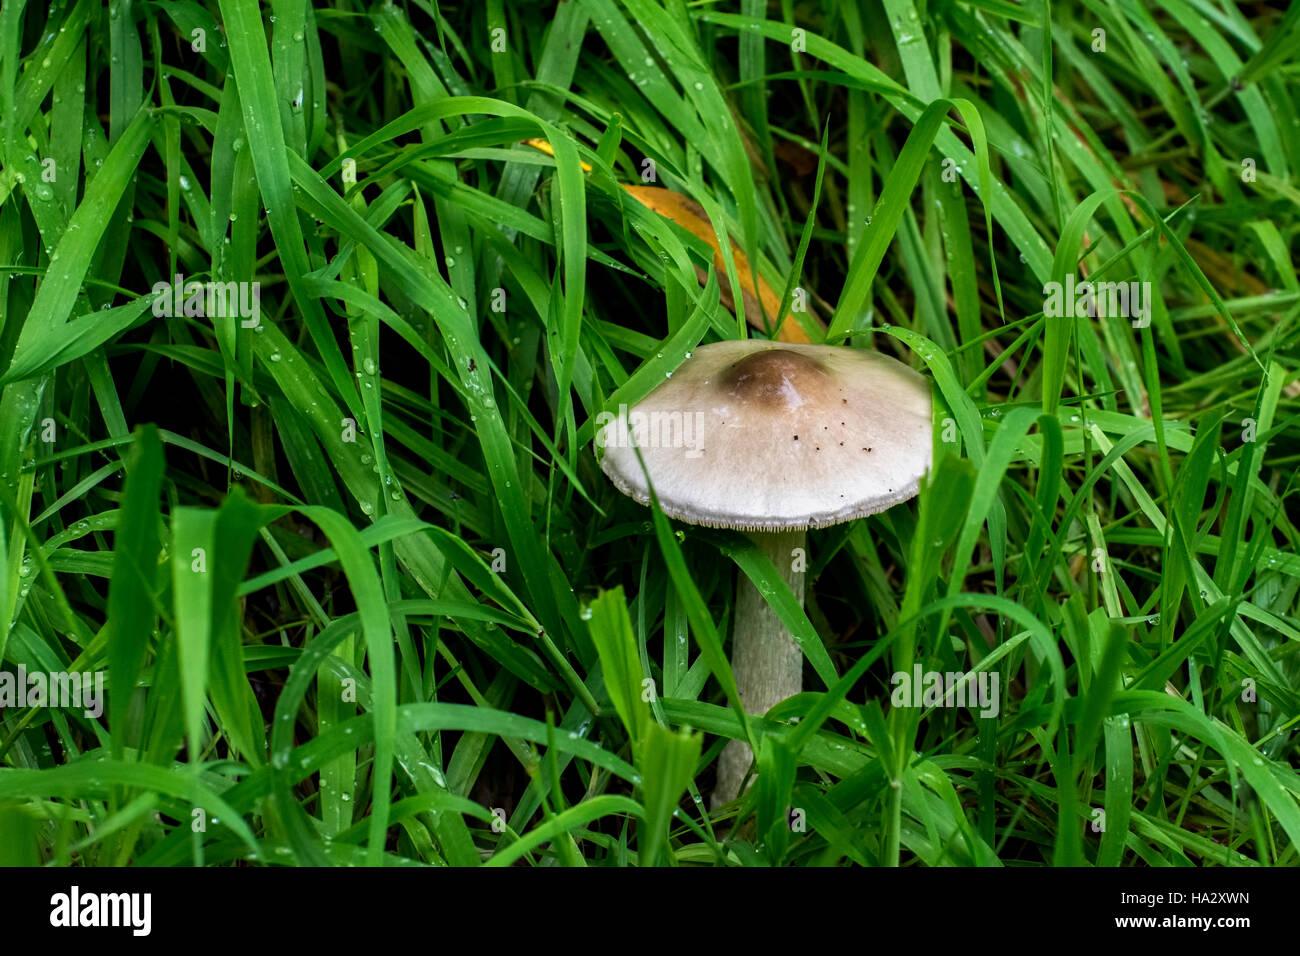 Mushroom growing in the green grass Stock Photo